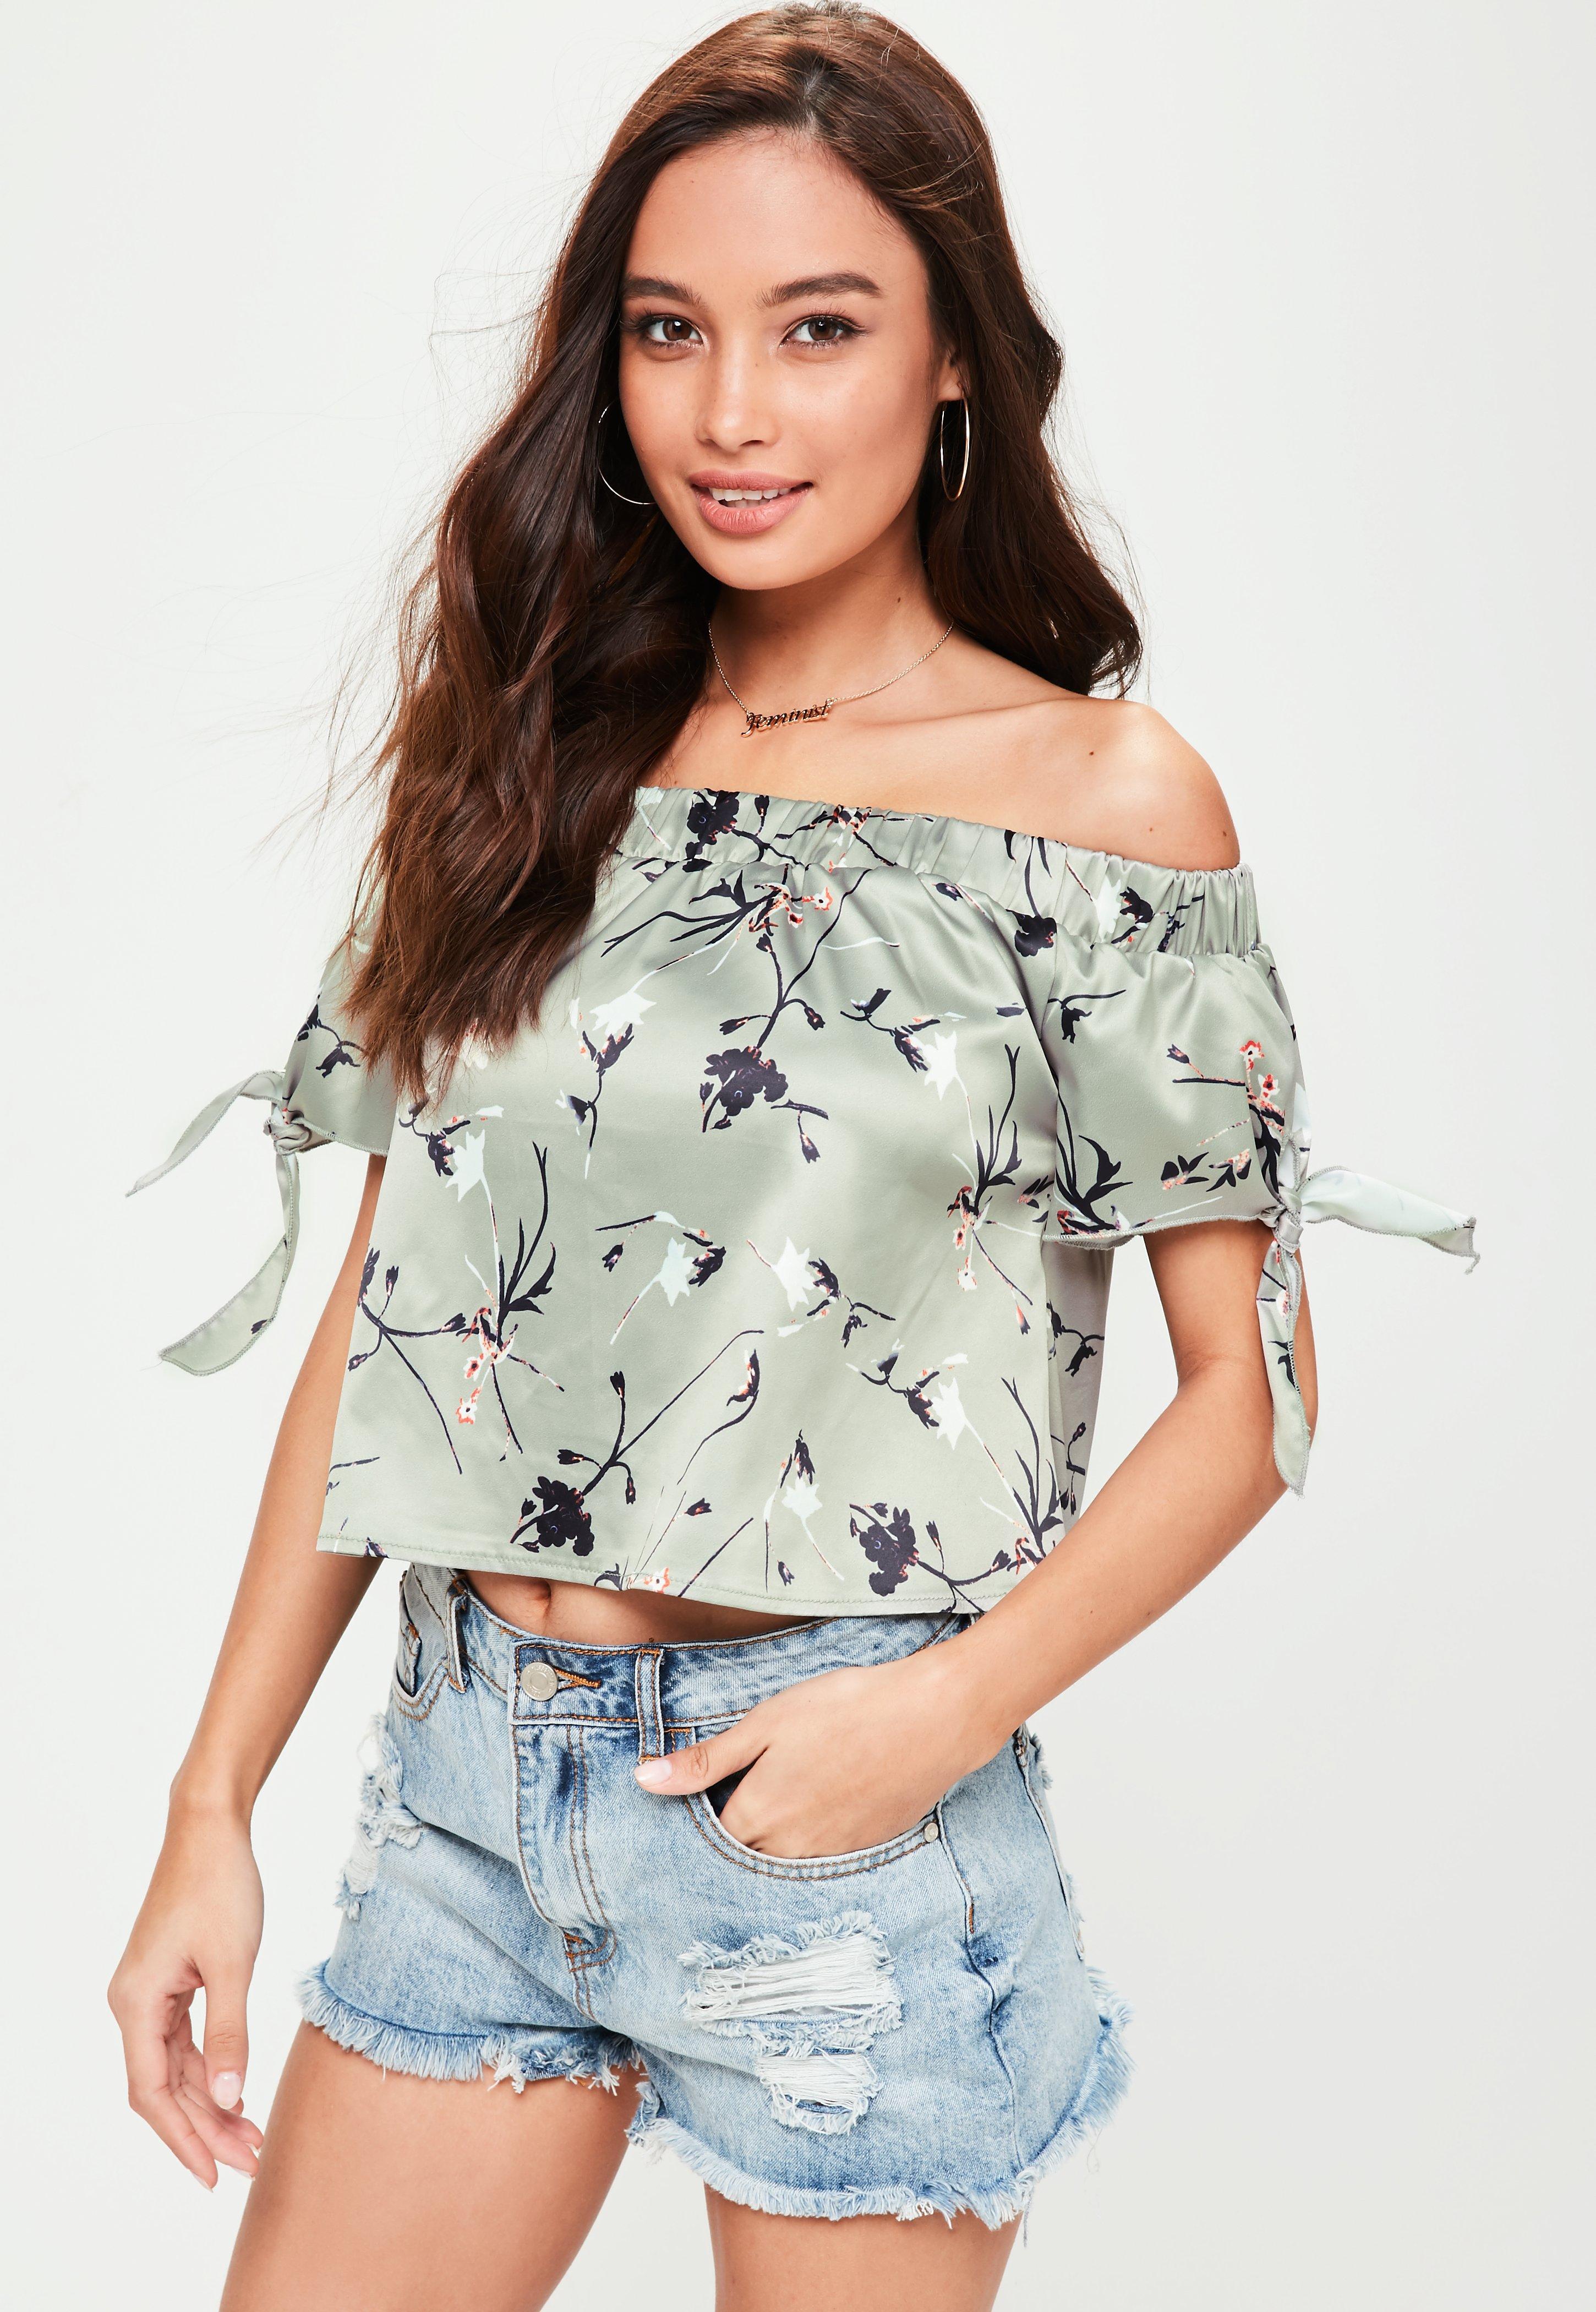 Lyst - Missguided Petite Grey Satin Floral Bardot Top in Gray